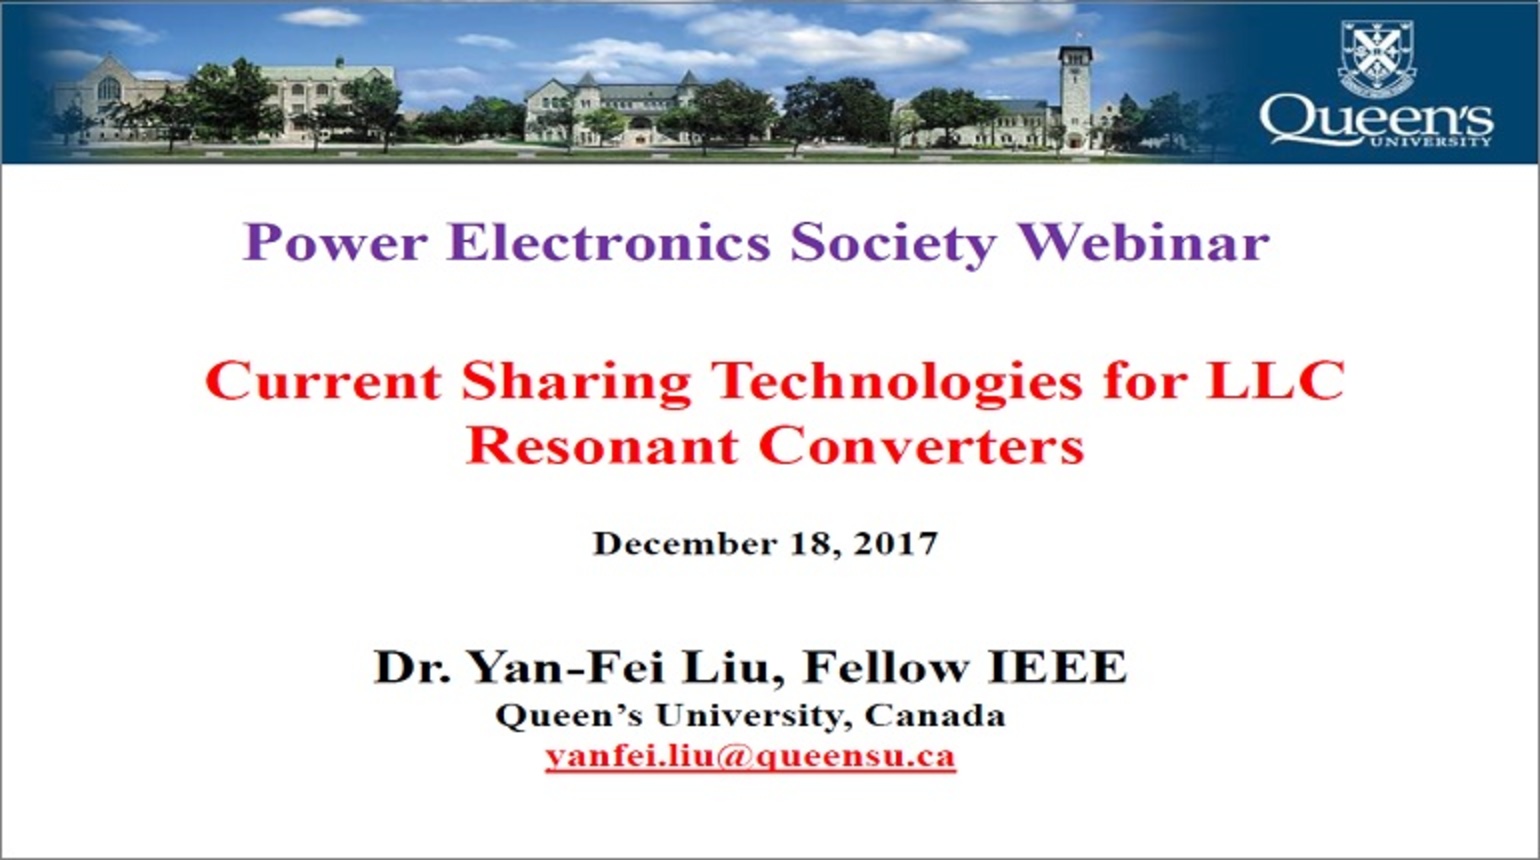 Current Sharing Technologies for LLC Resonant Converters Video